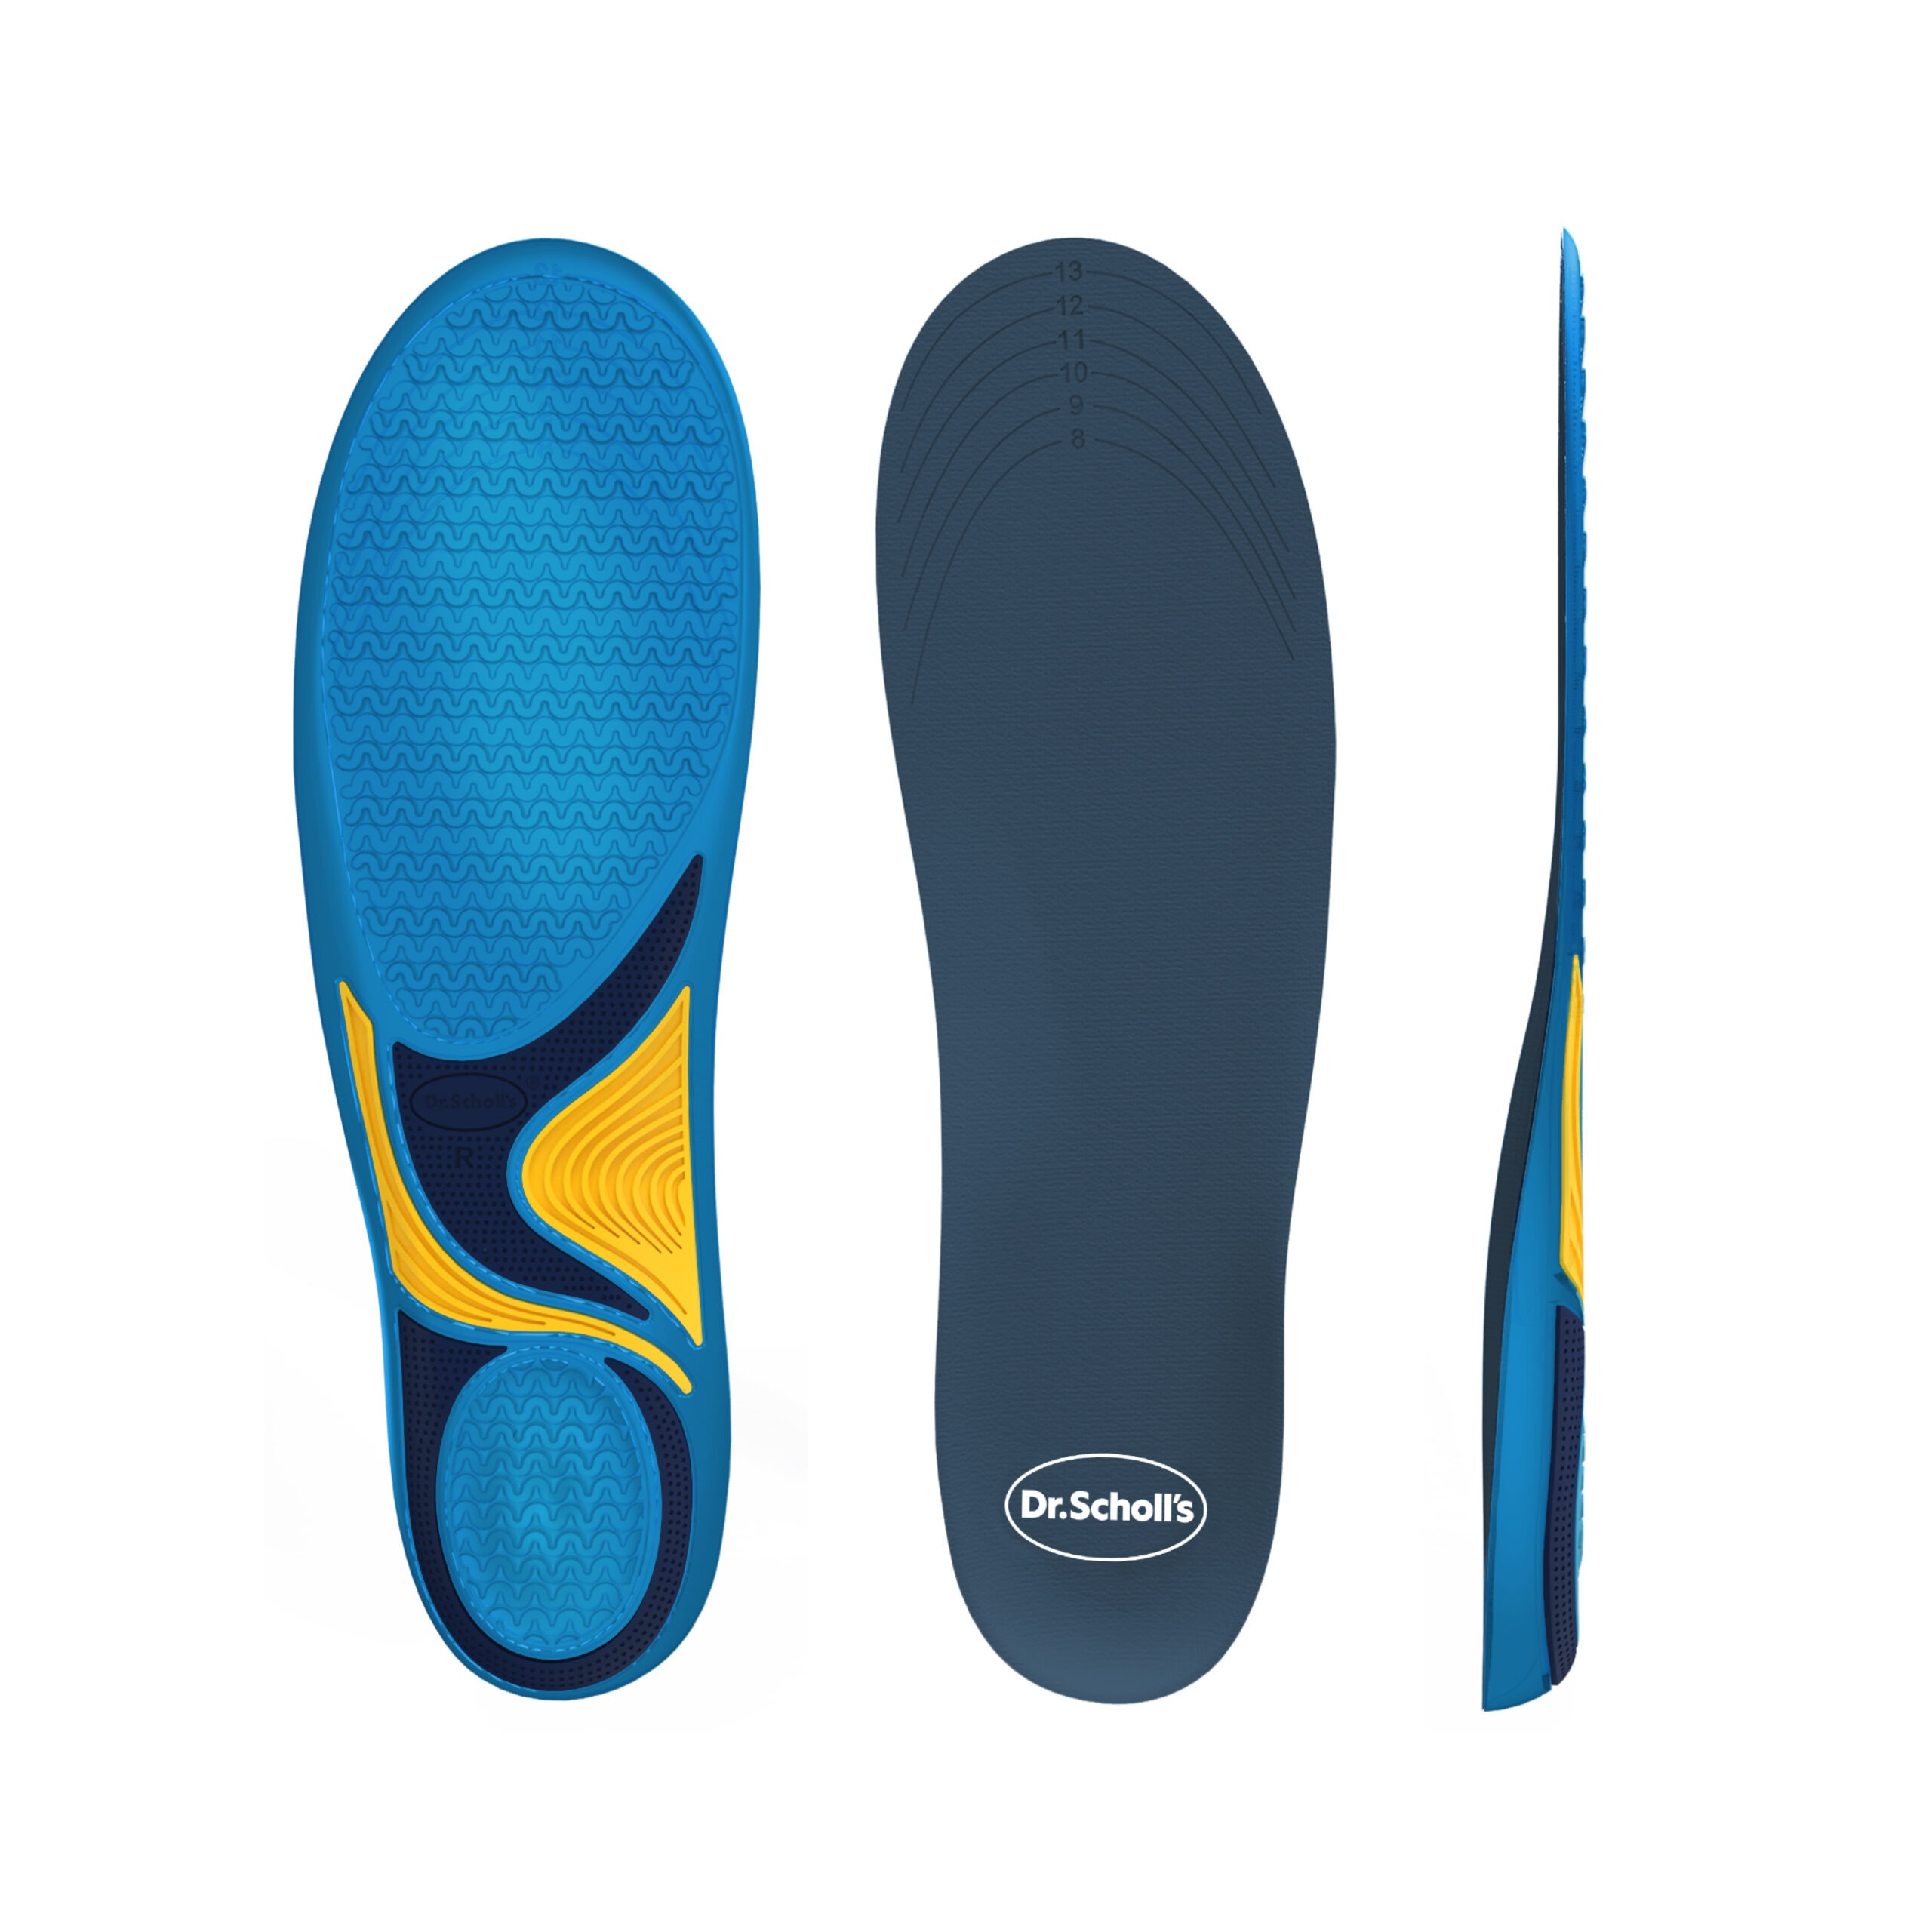 Work Insoles with Massaging Gel®